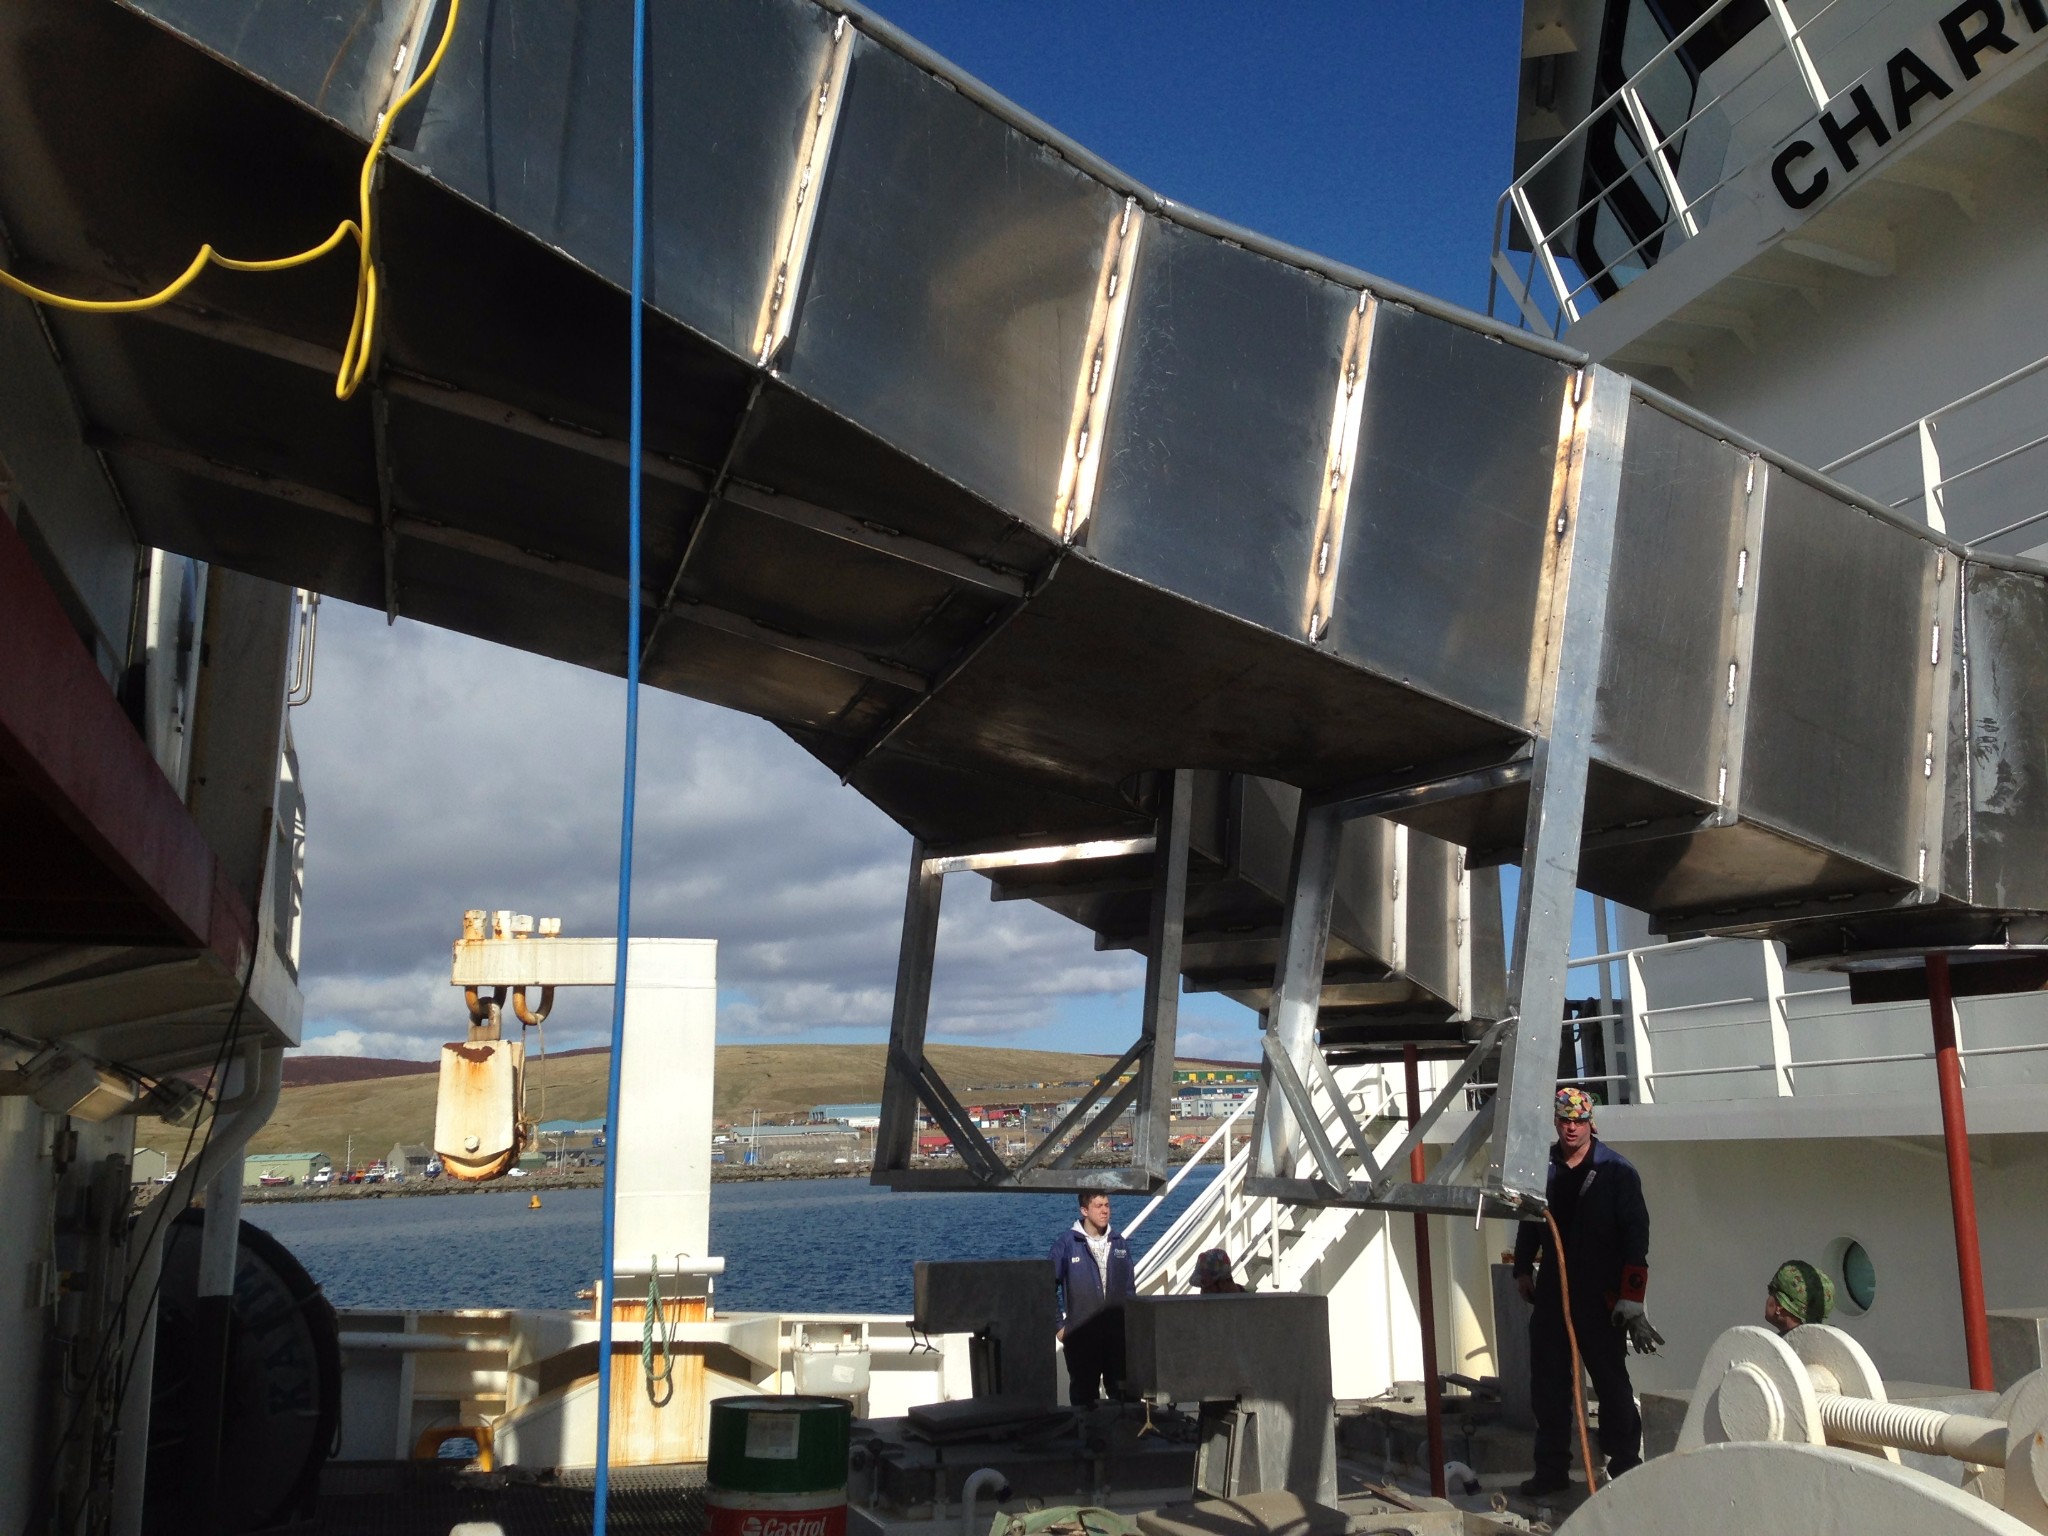 Ocean Kinetics carry out works on the MV Research